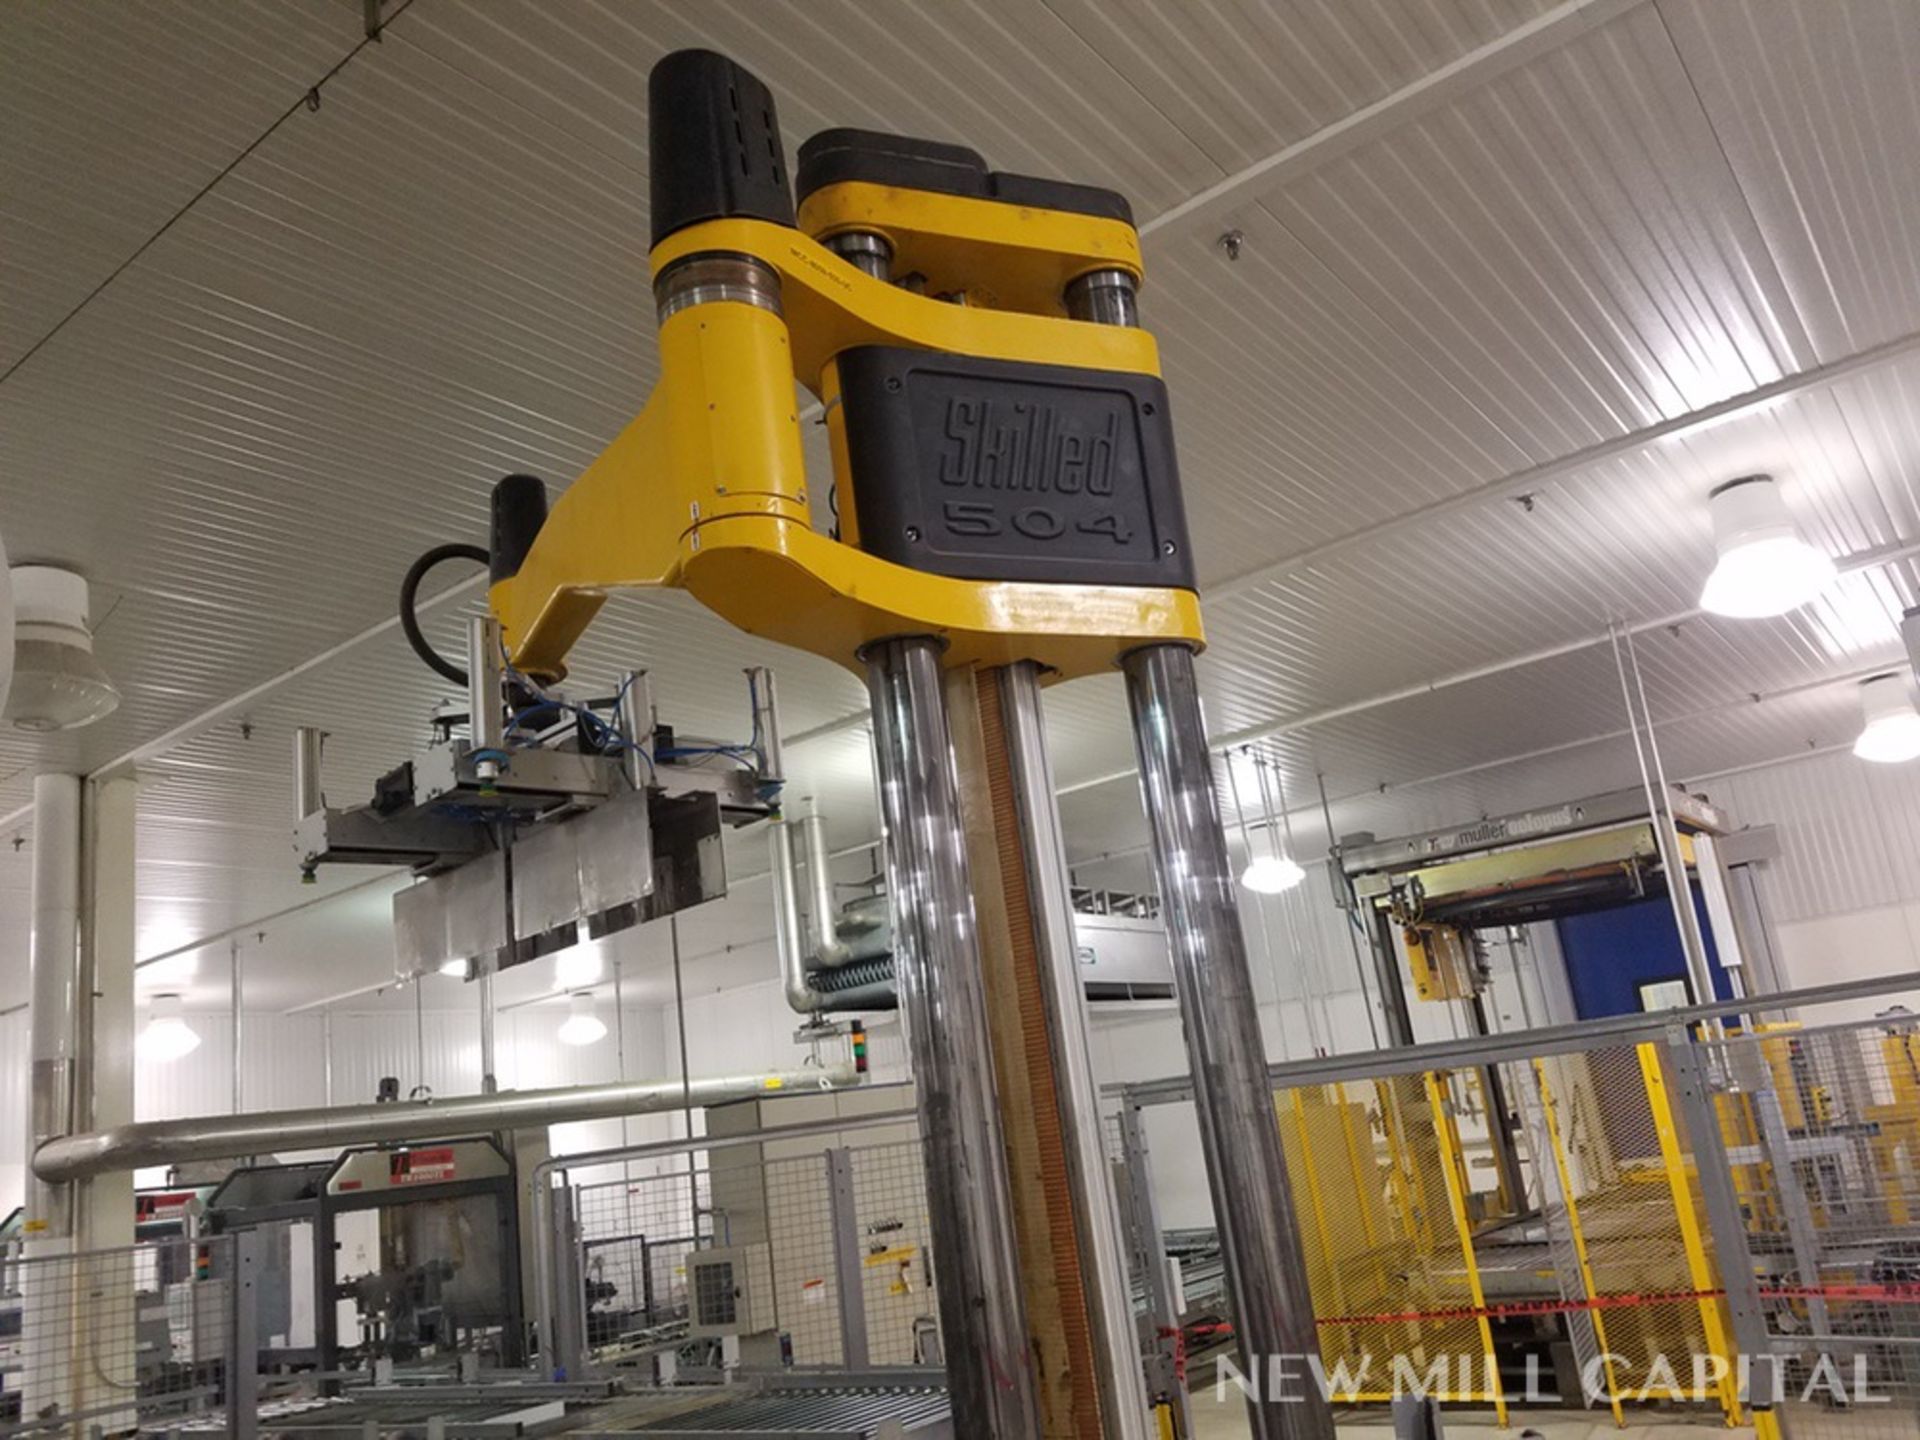 Skilled 504 Palletizing Robot | Contact Rigger for Pricing - Image 6 of 13